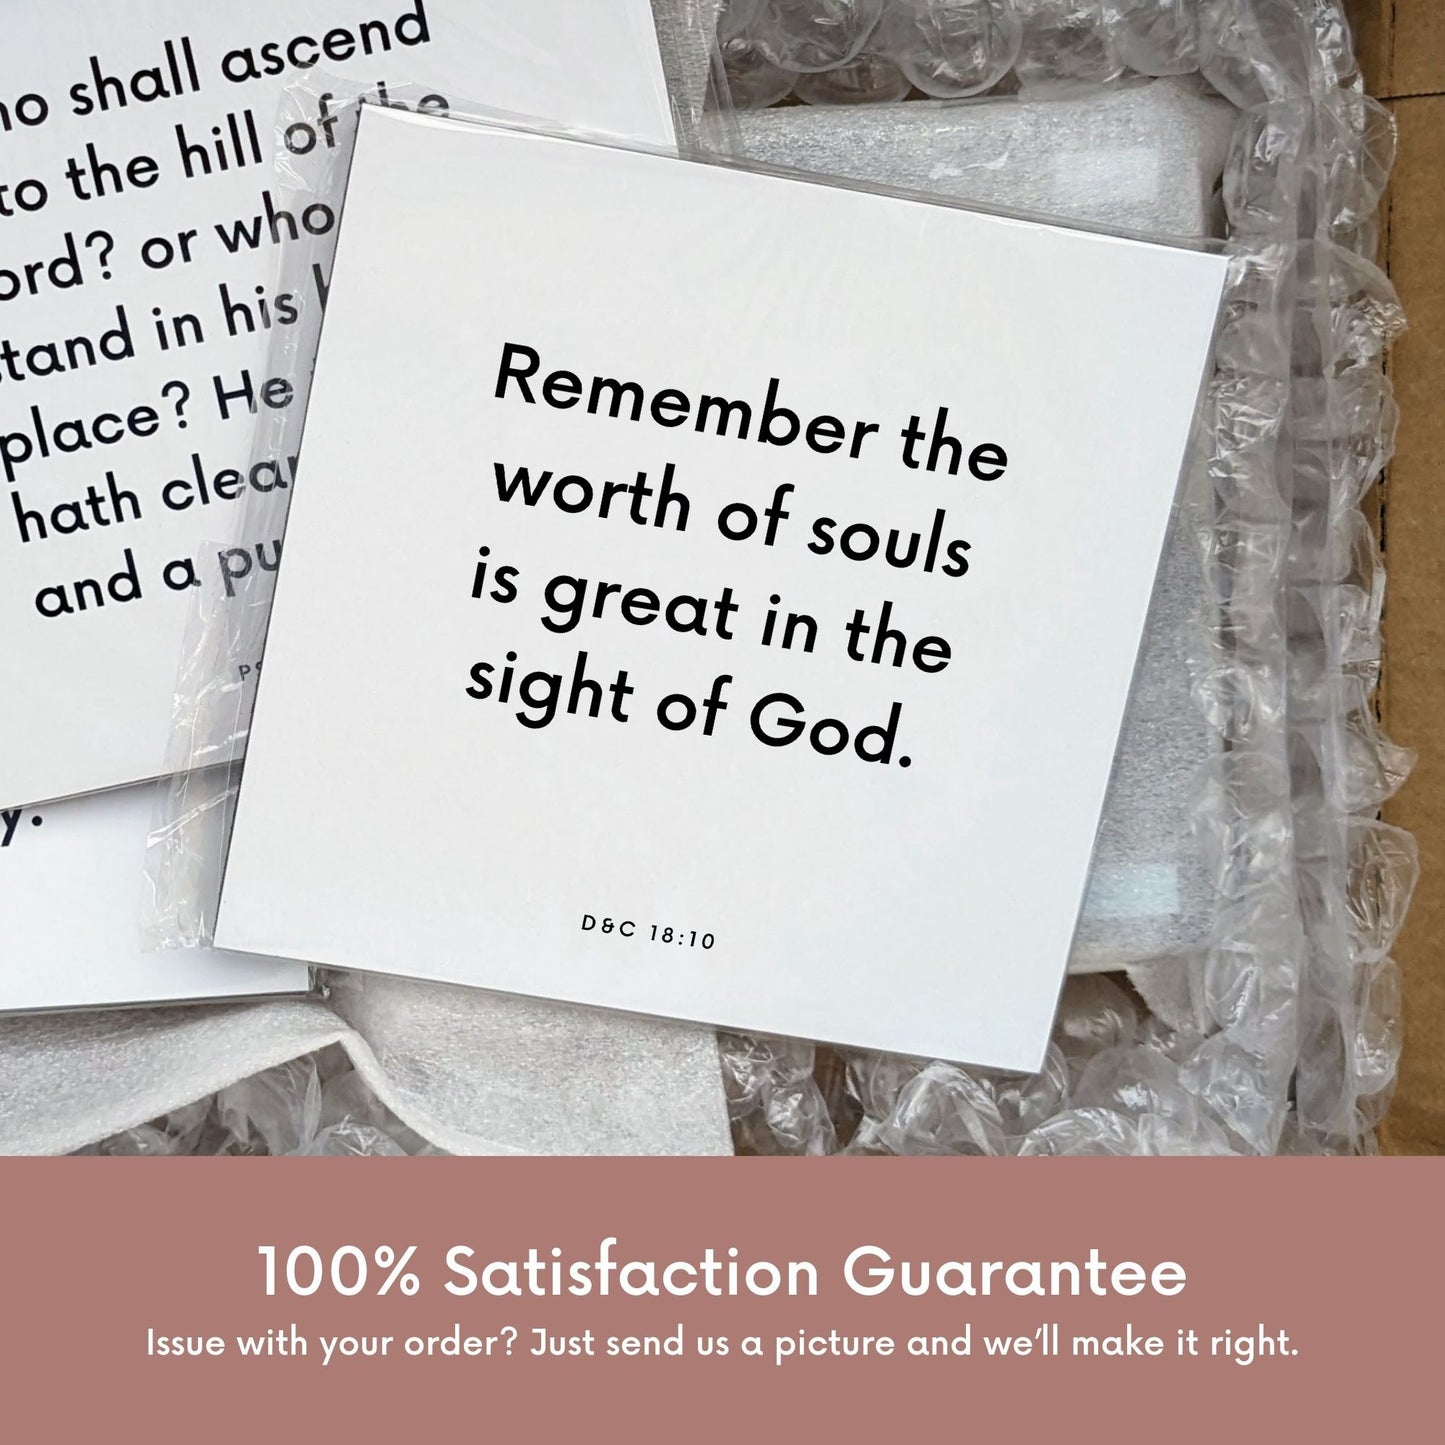 Shipping materials for scripture tile of D&C 18:10 - "Remember the worth of souls is great in the sight of God"